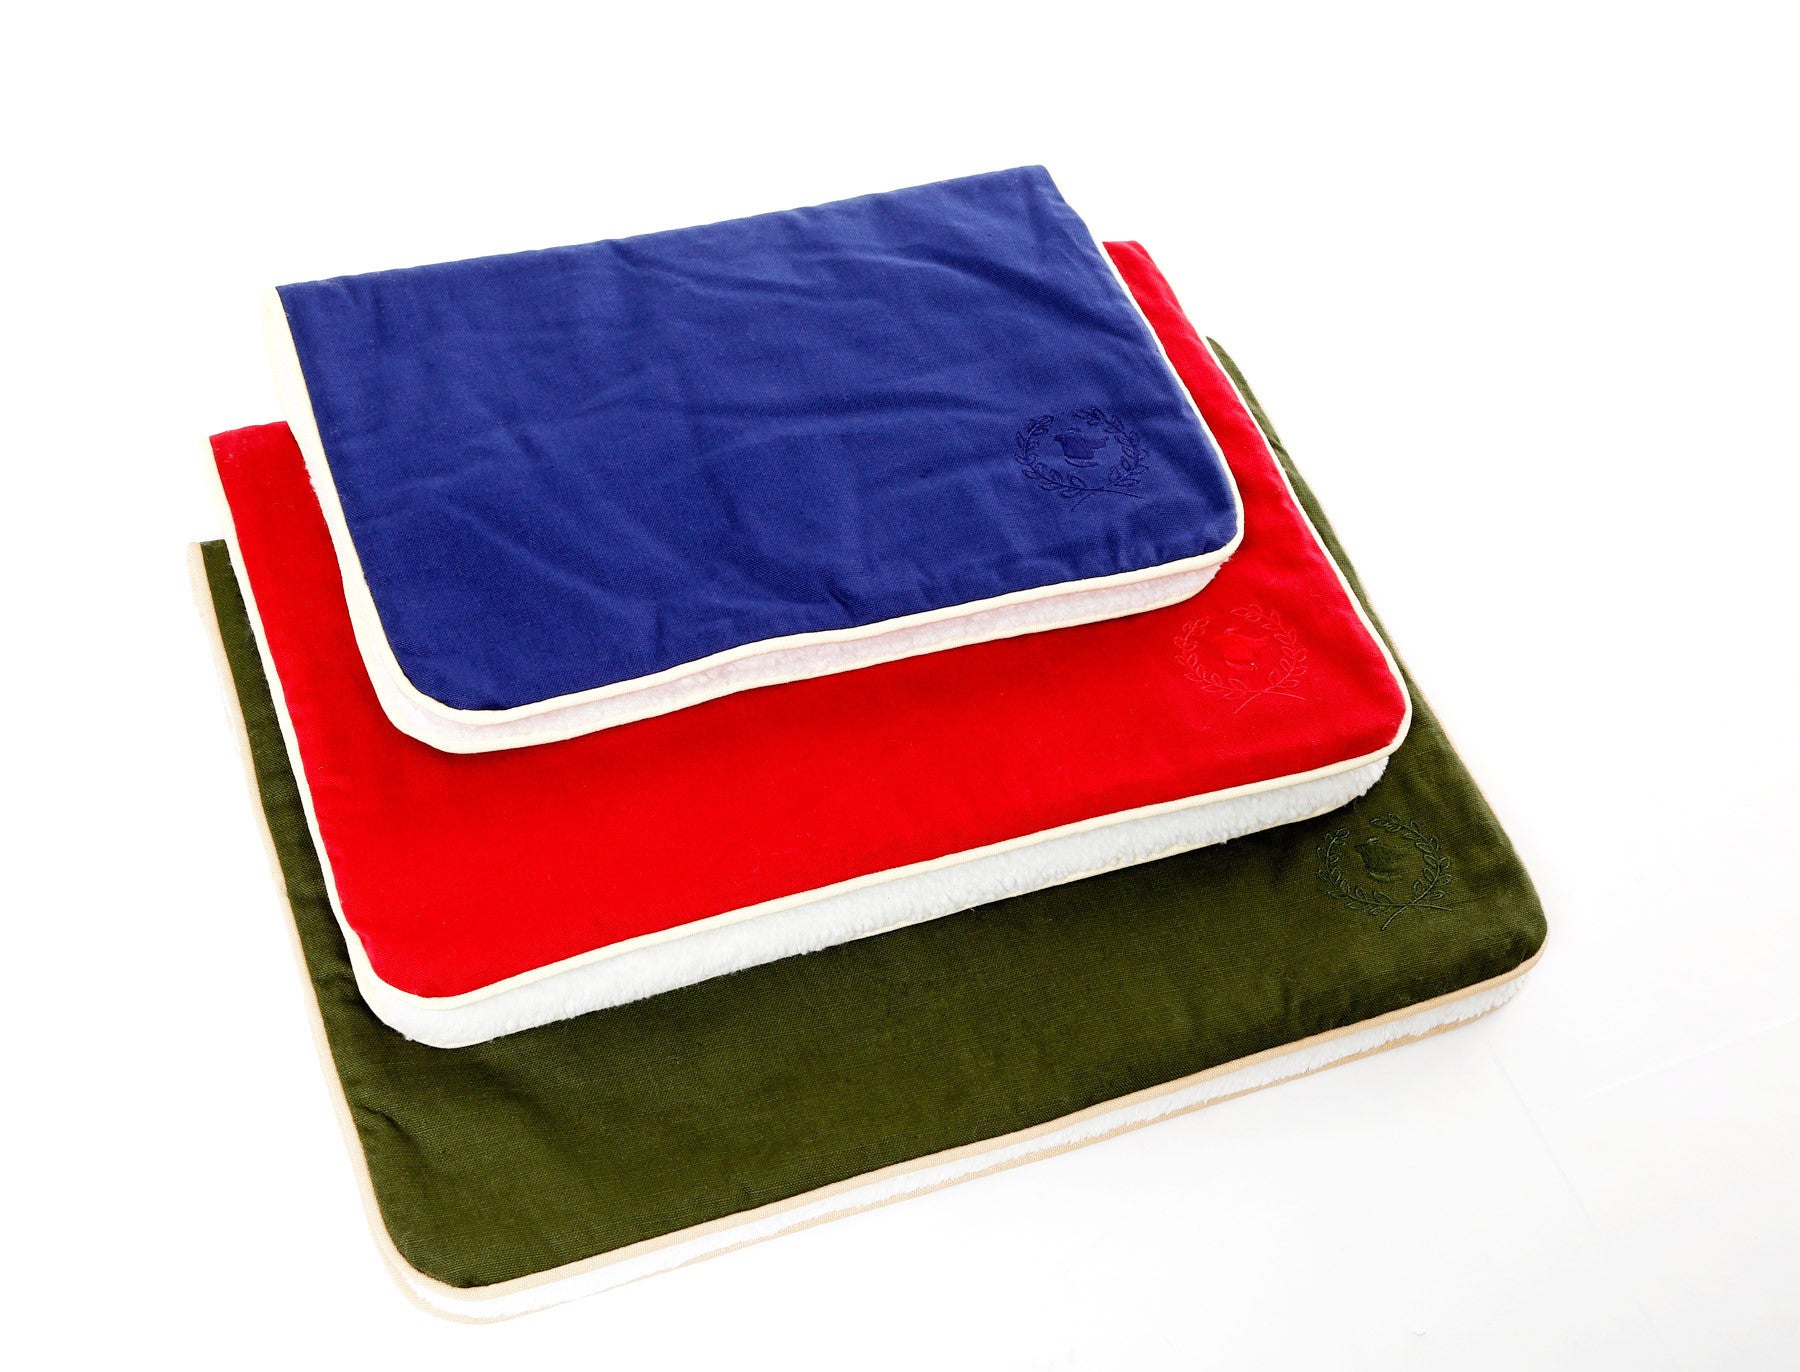 Canine Styles - Crate Mat - Solid Colored w/Off White Piping Cotton Canvas - Dog Bed, 5 Colors